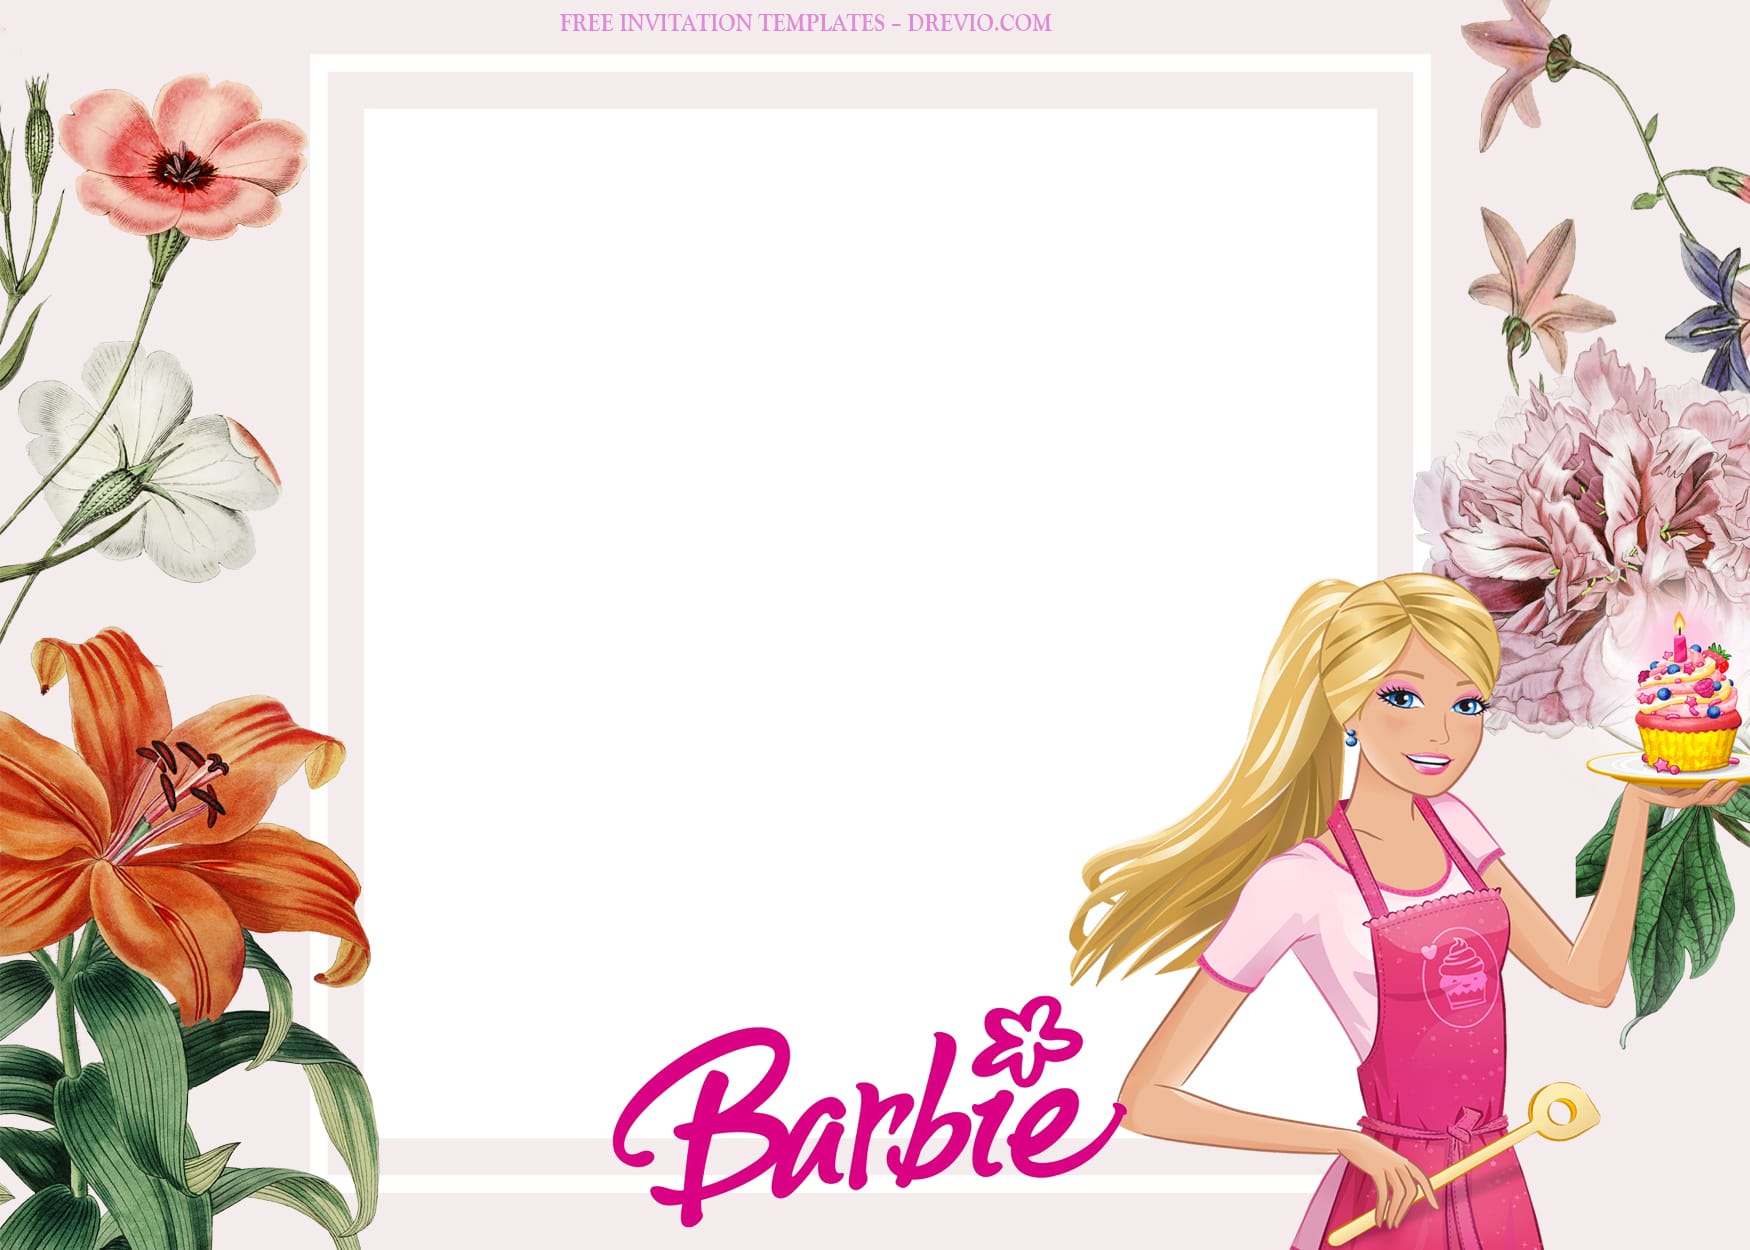 8+ A Good Day With Barbie Birthday Invitation Templates Type Three